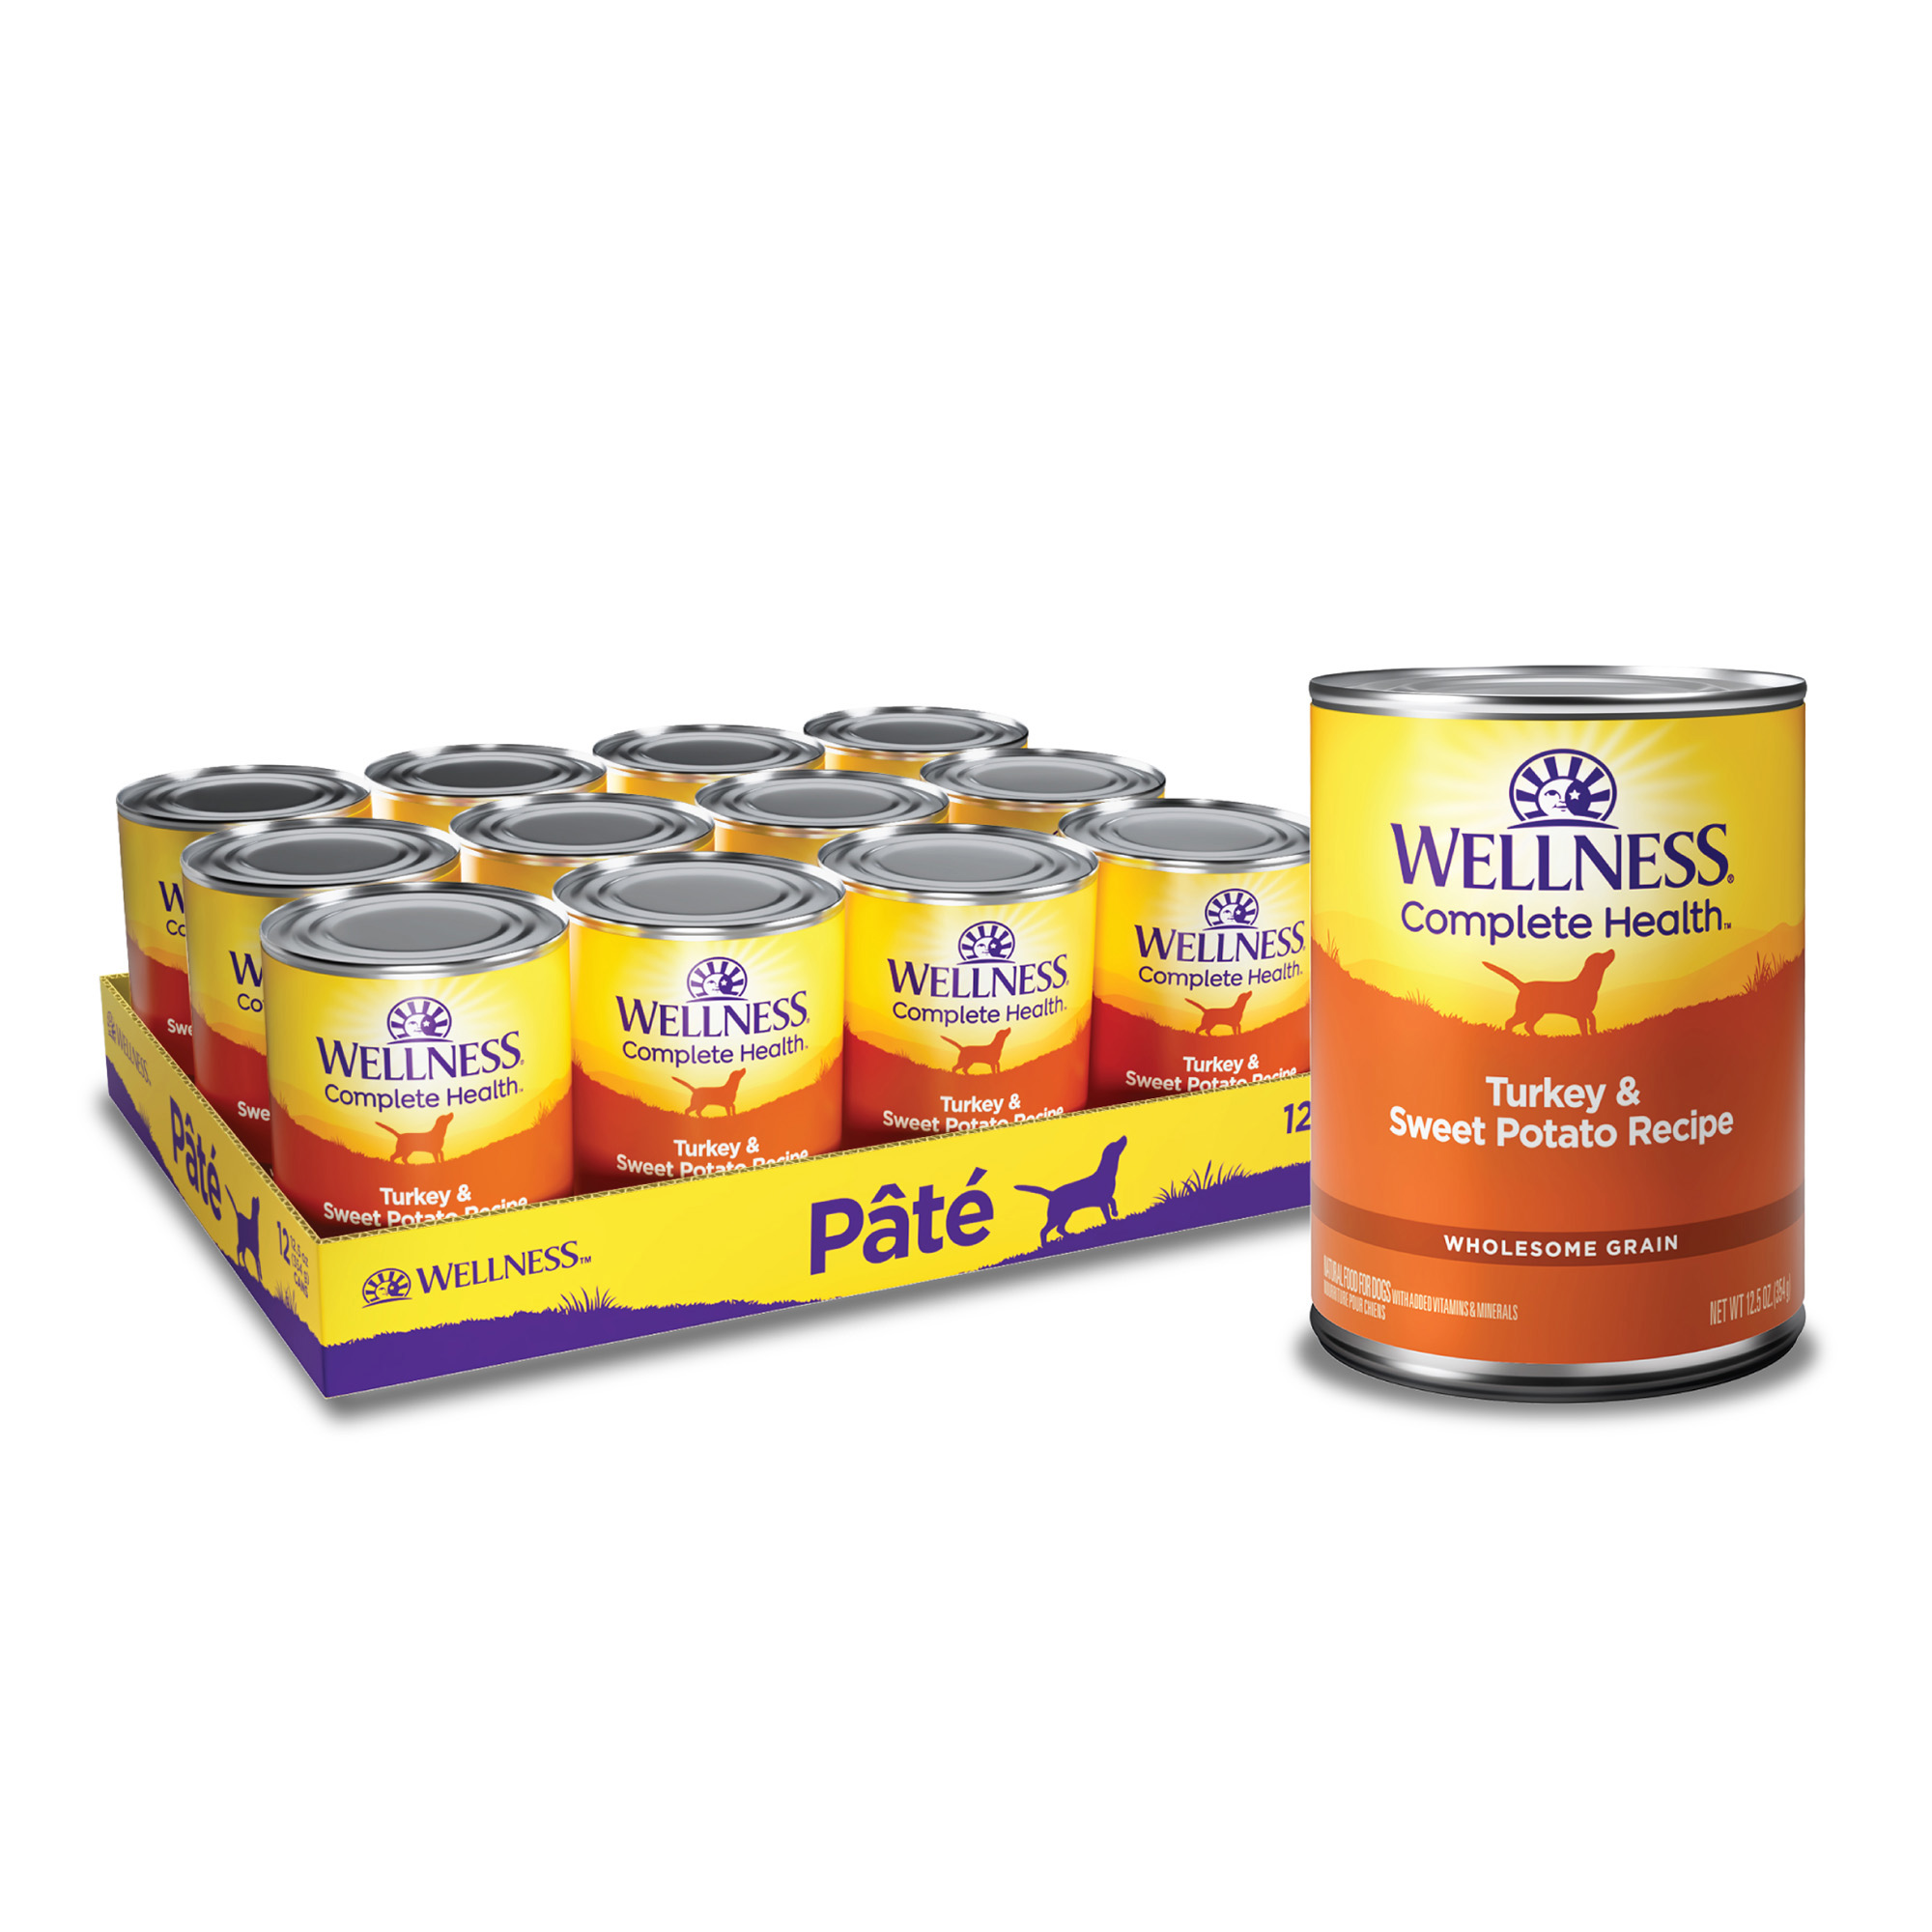 Wellness Complete Health Natural Wet Canned Dog Food Turkey & Sweet Potato, 12.5-Ounce Can (Pack of 12) - image 1 of 7